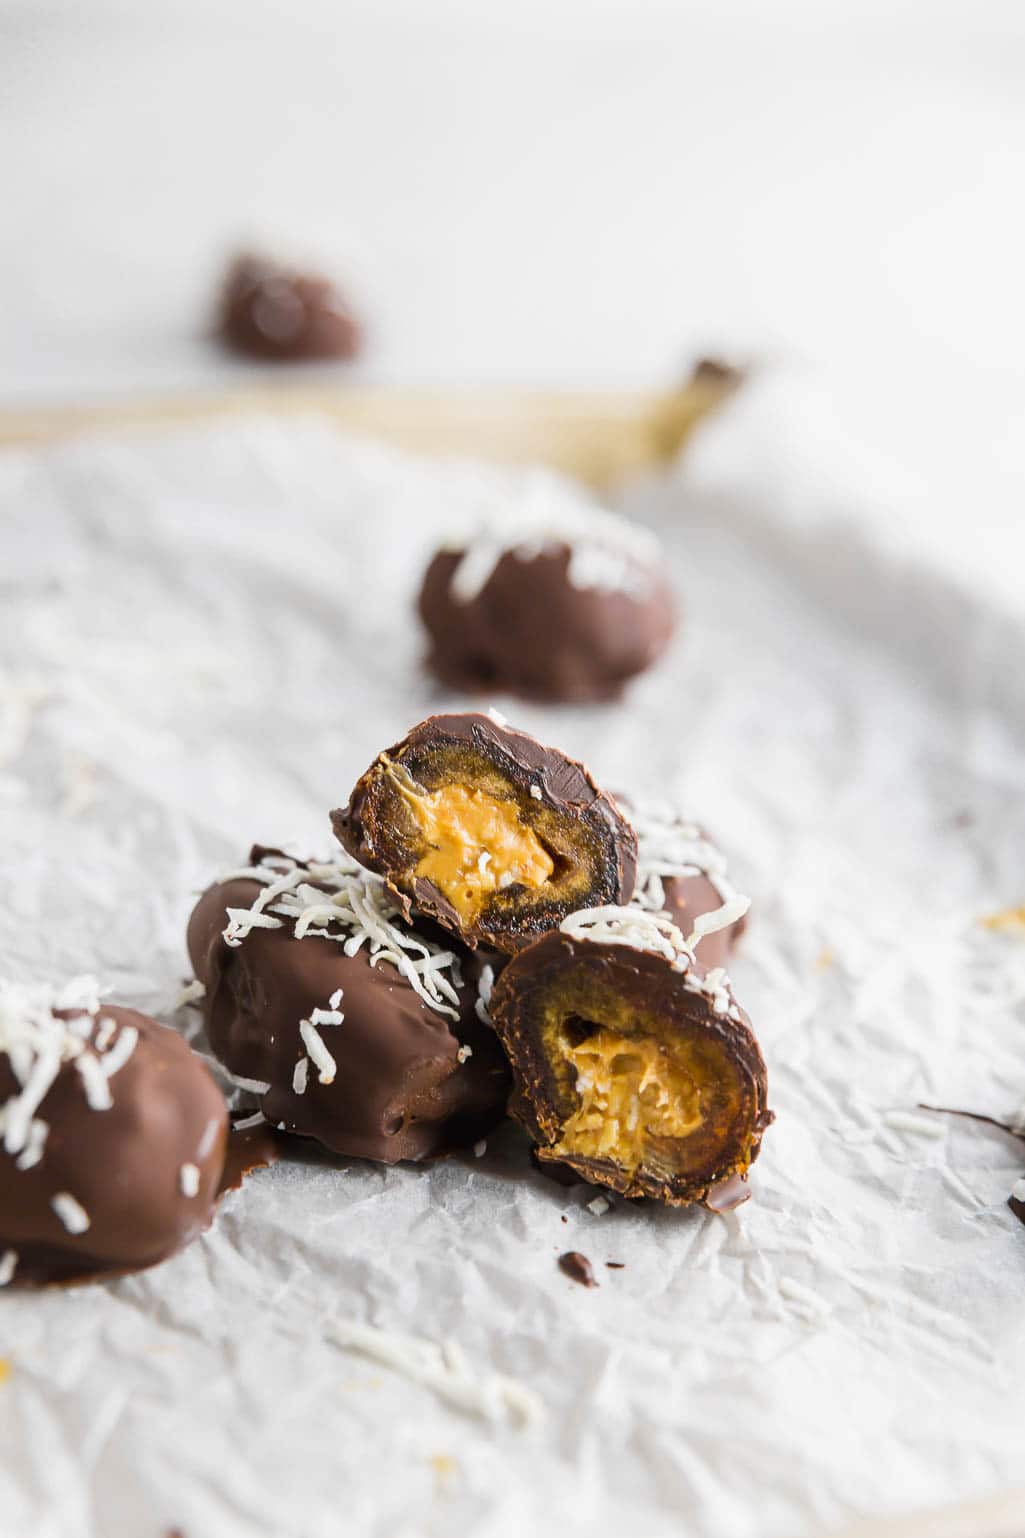 Peanut Butter Stuffed Chocolate Covered Dates